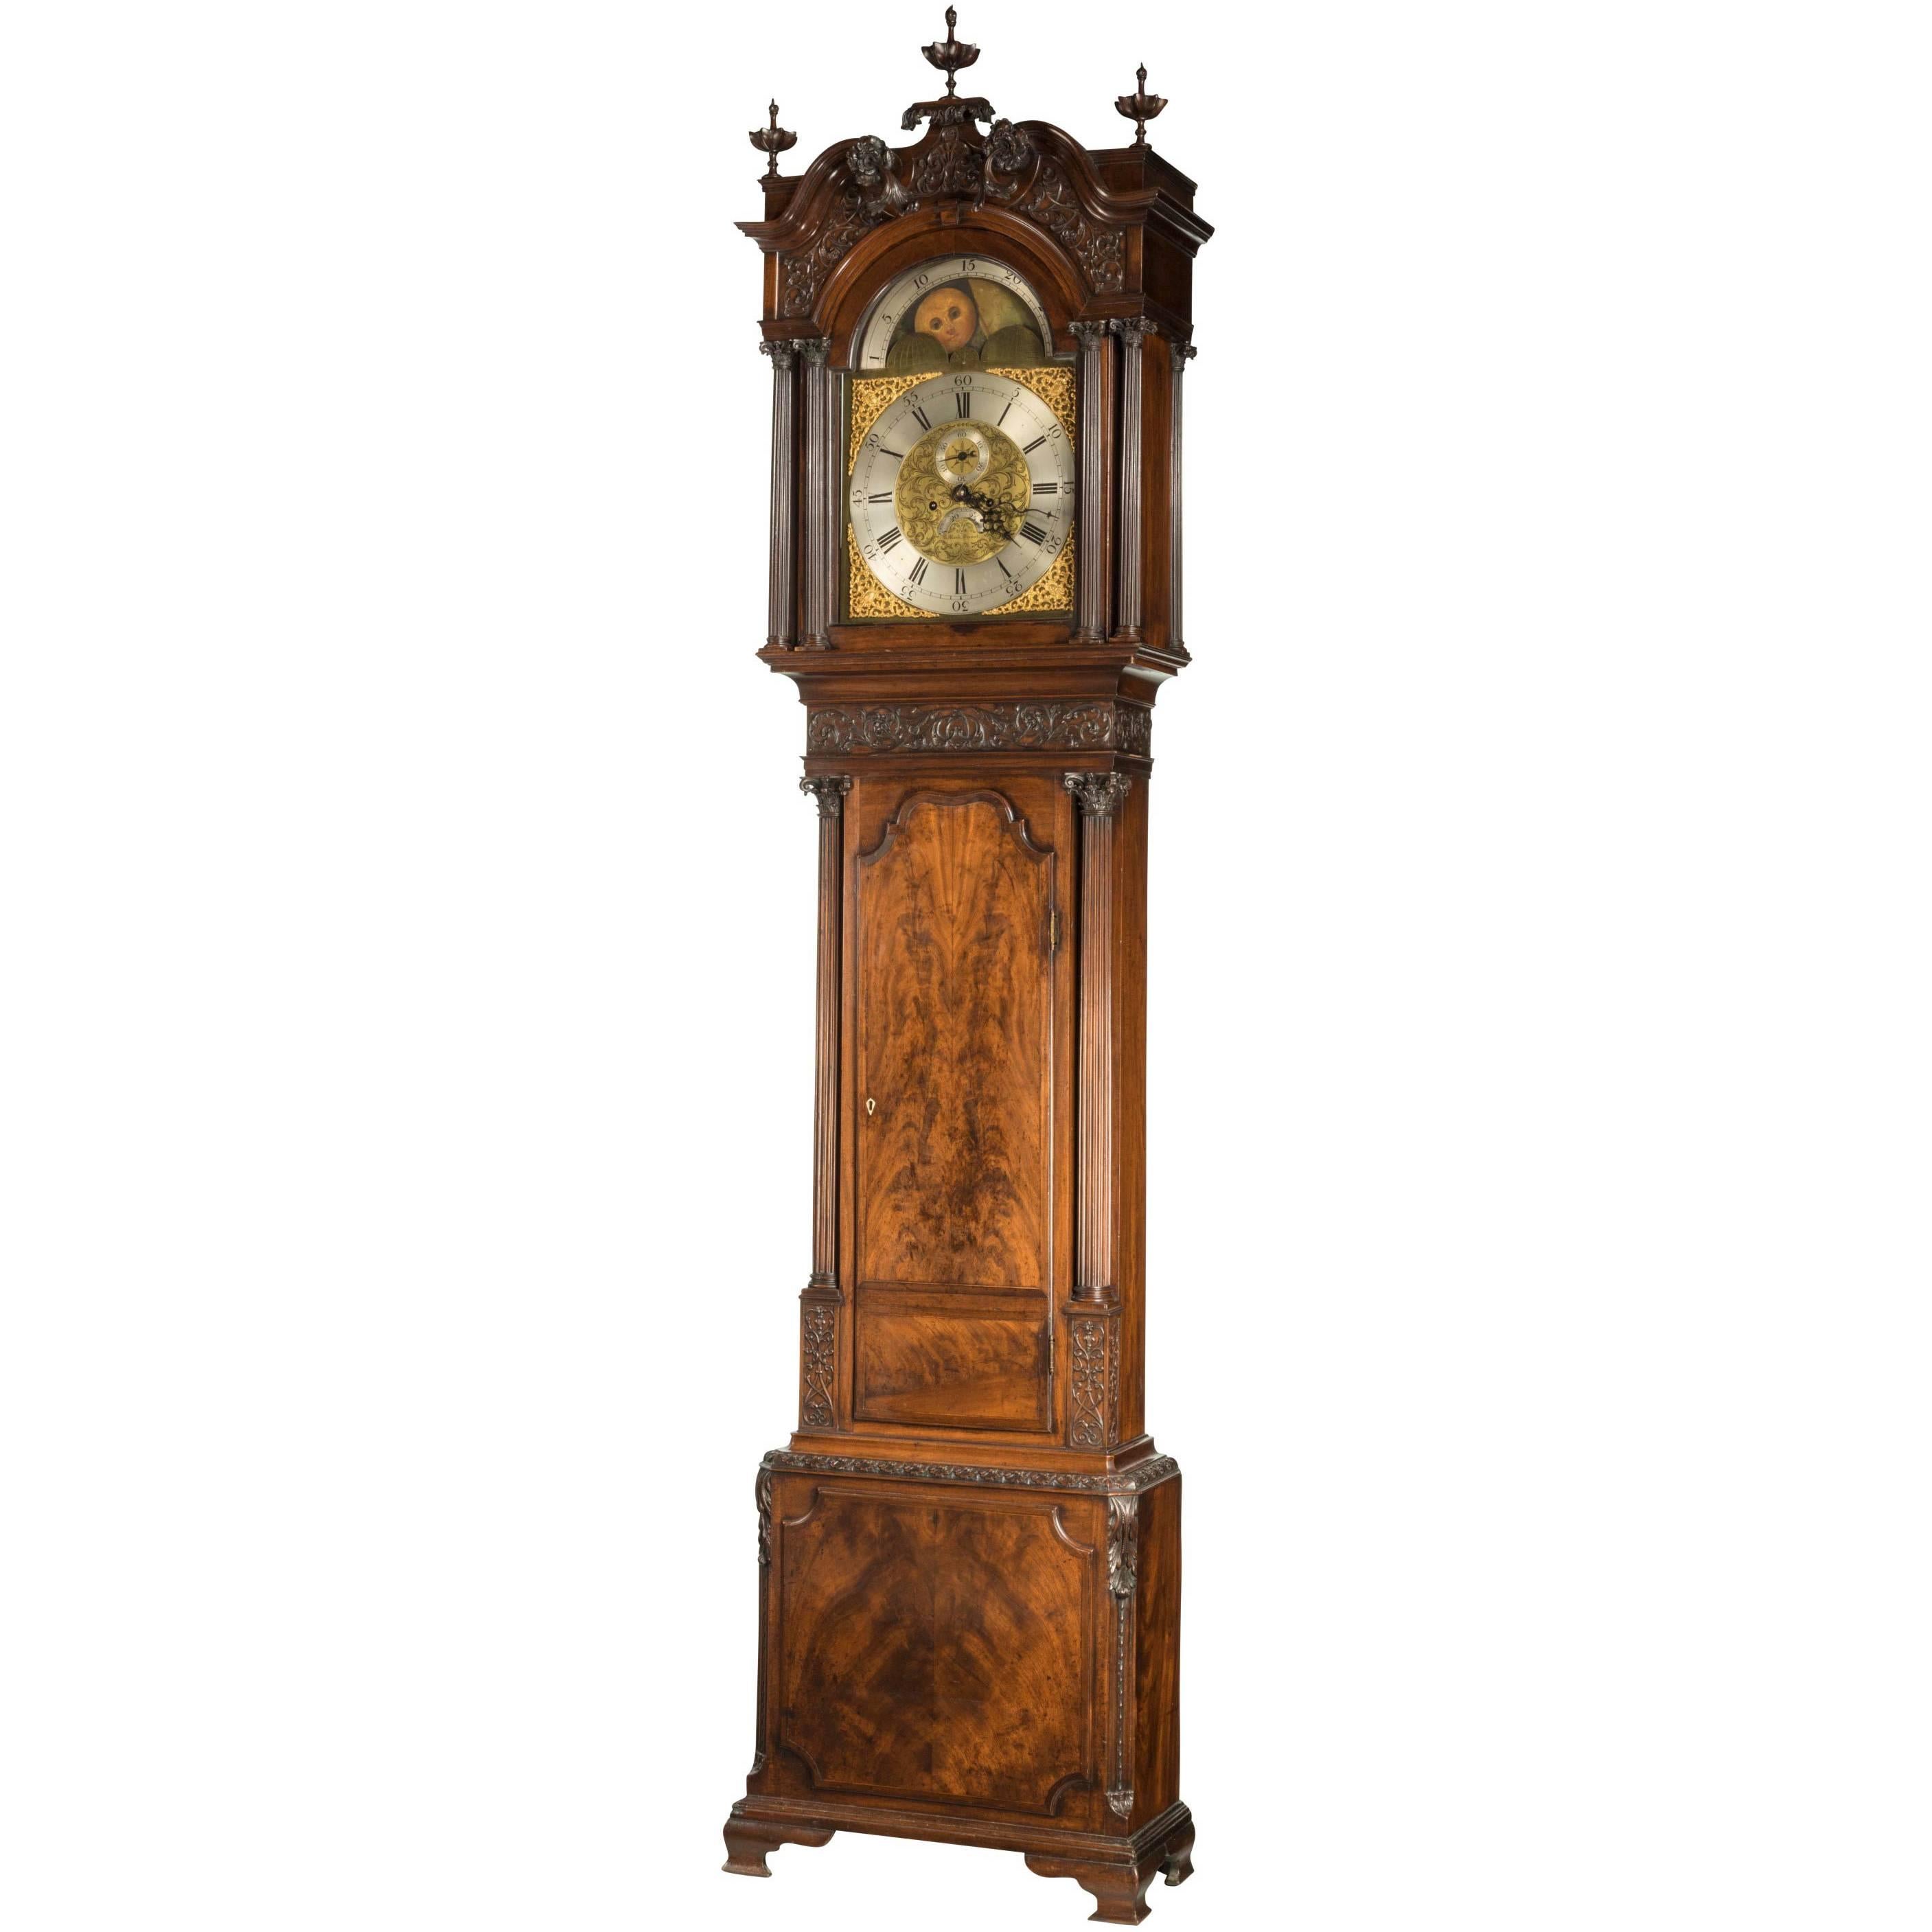 George III Period Carved Mahogany Longcase Clock by George Monk of Prescot